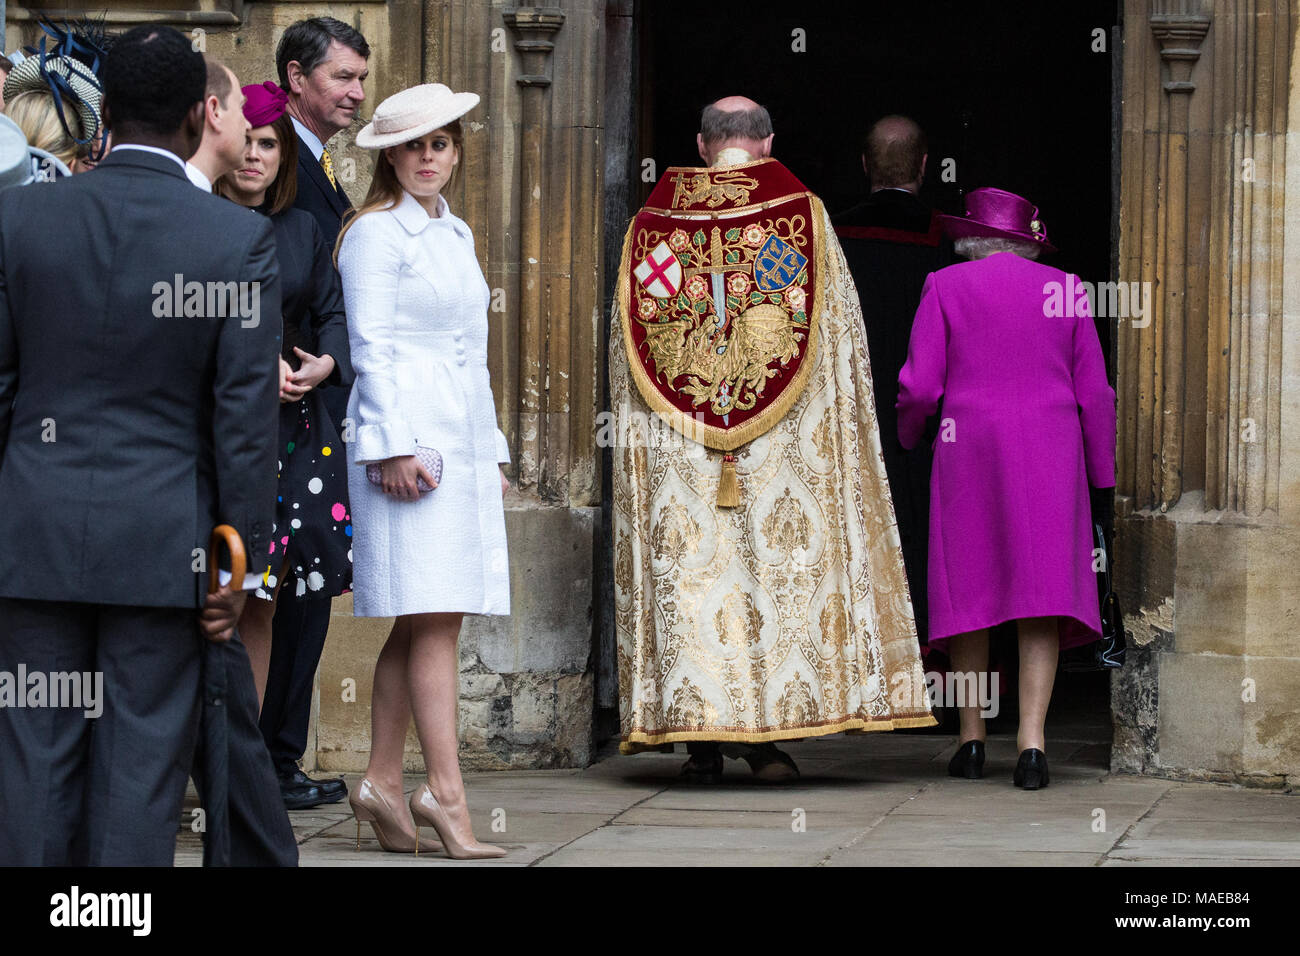 Windsor, UK. 1st April, 2018. The Queen arrives at St George's Chapel in Windsor Castle for the Easter Sunday service. Credit: Mark Kerrison/Alamy Live News Stock Photo